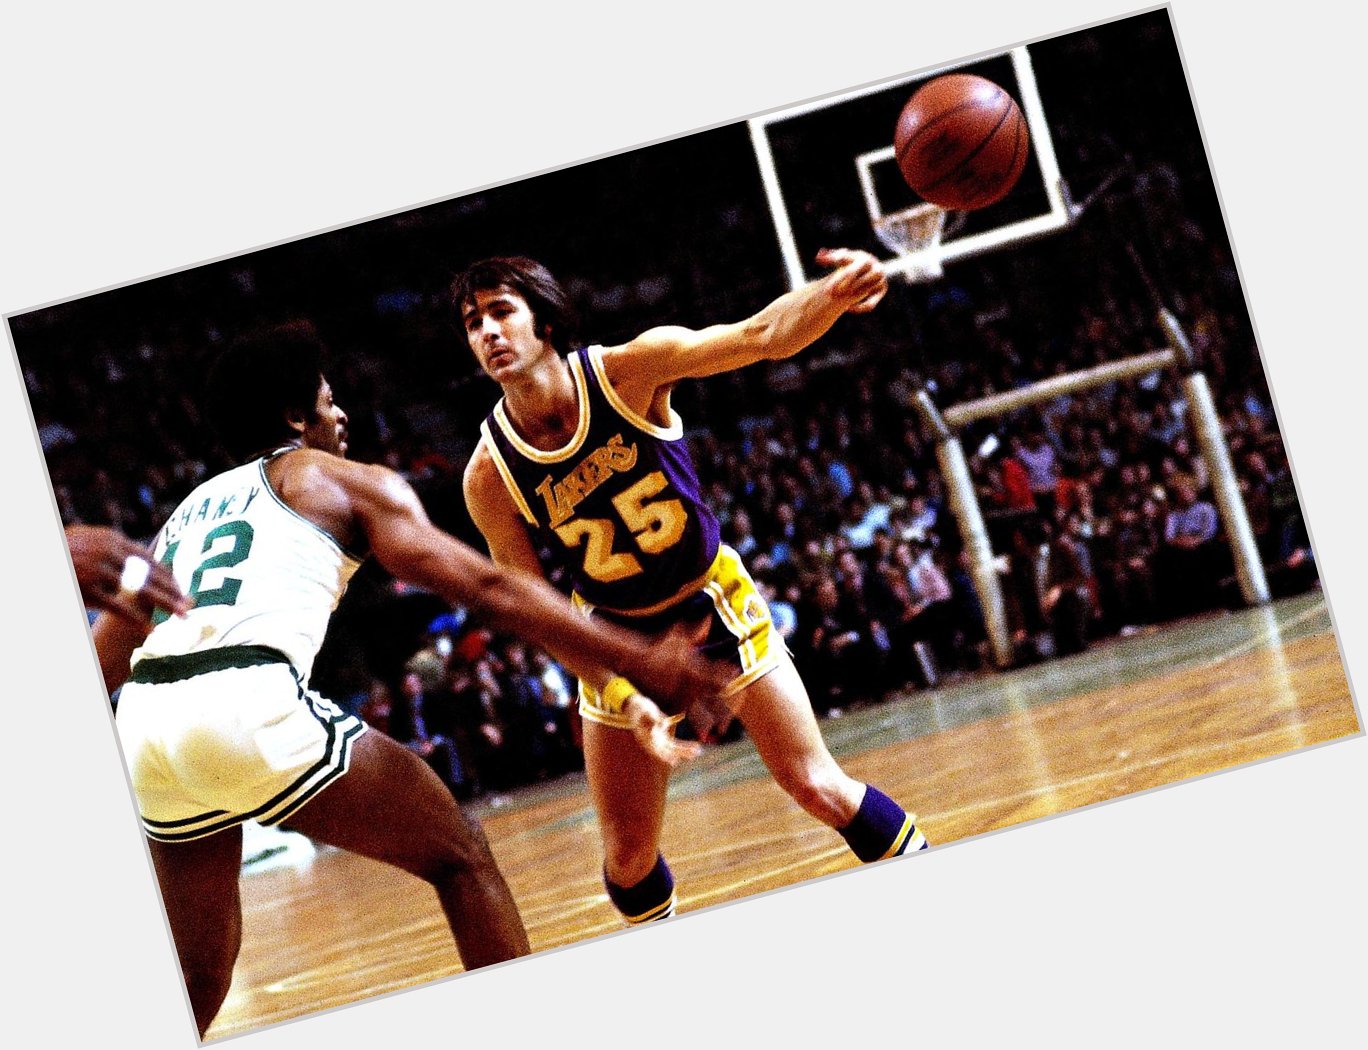 Happy Birthday to Gail Goodrich, who turns 72 today! 